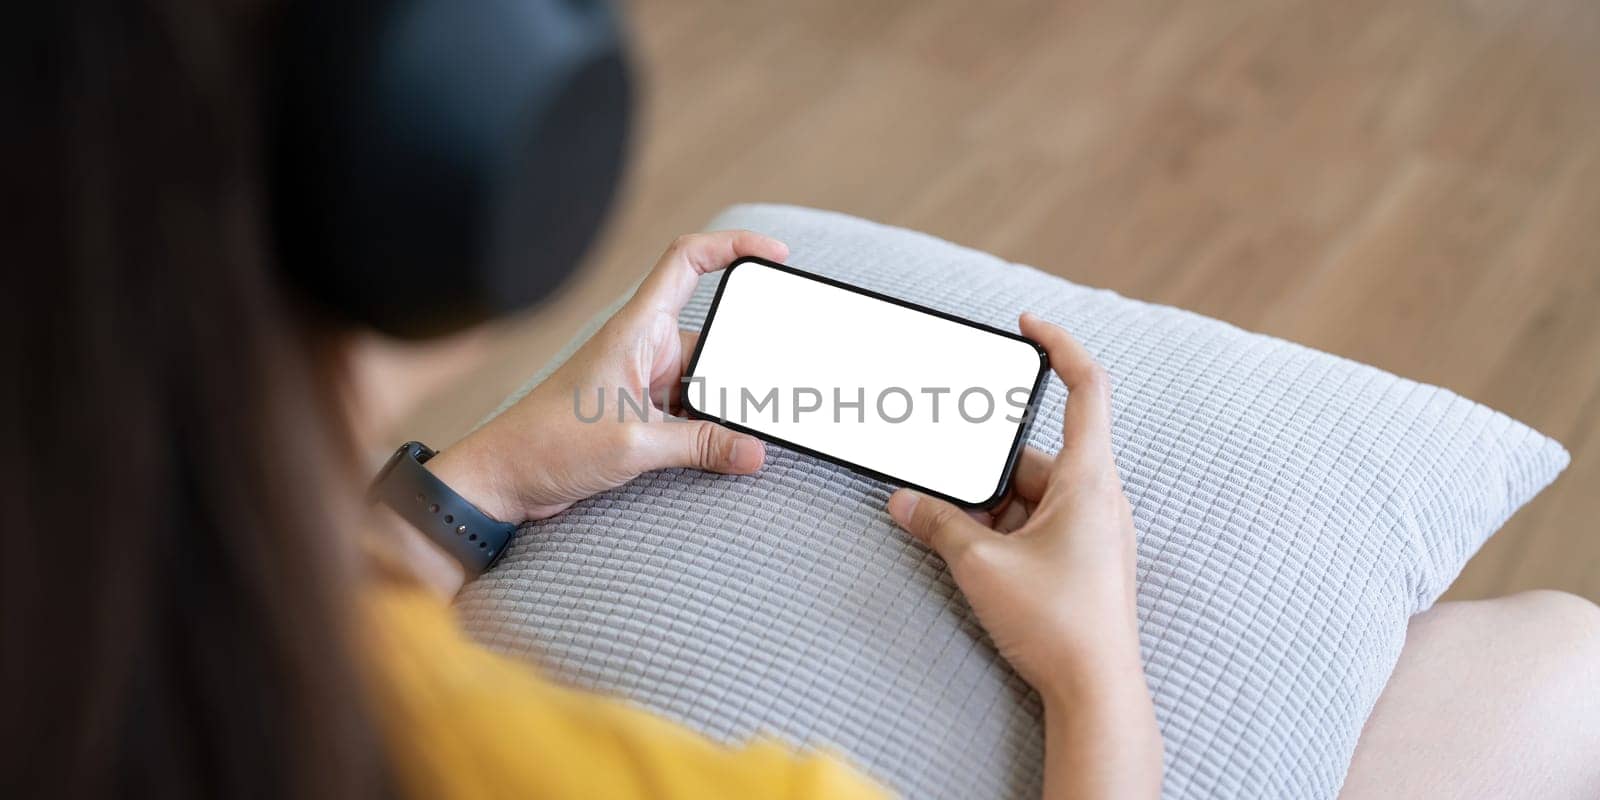 Mockup smartphone of a woman holding mobile phone with blank white screen while sitting listen to music at home.